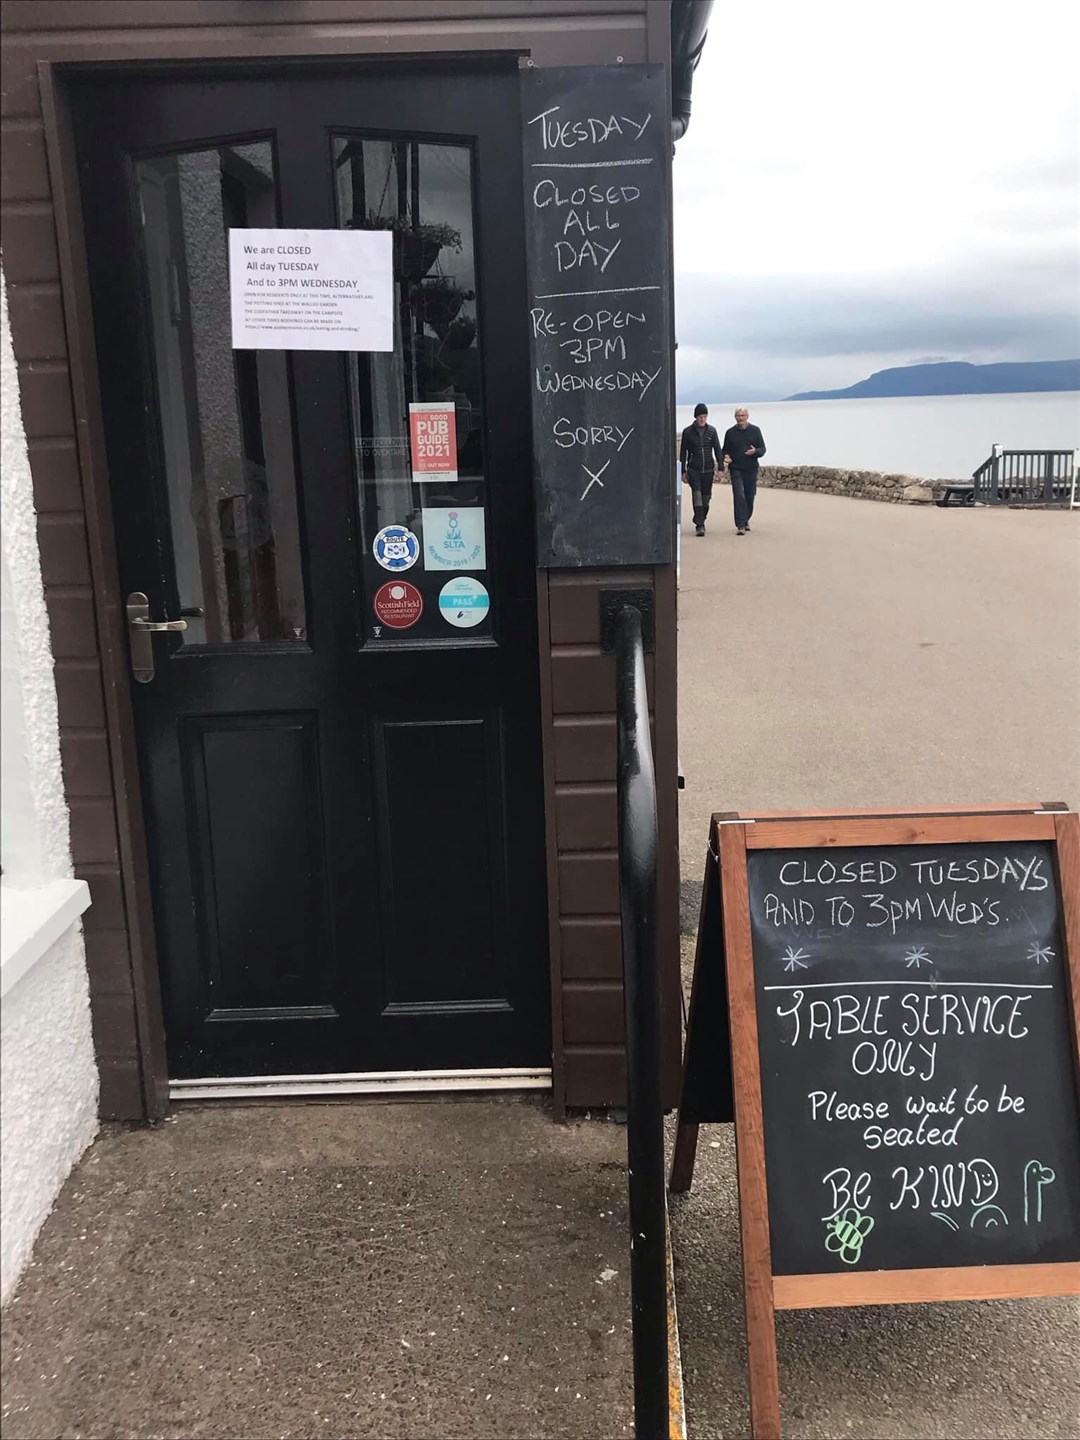 The inn says it has done everything it can to make clear it's closed to non-residents on Tuesdays, to allow it's hard-working staff some down time. Picture: Applecross Inn